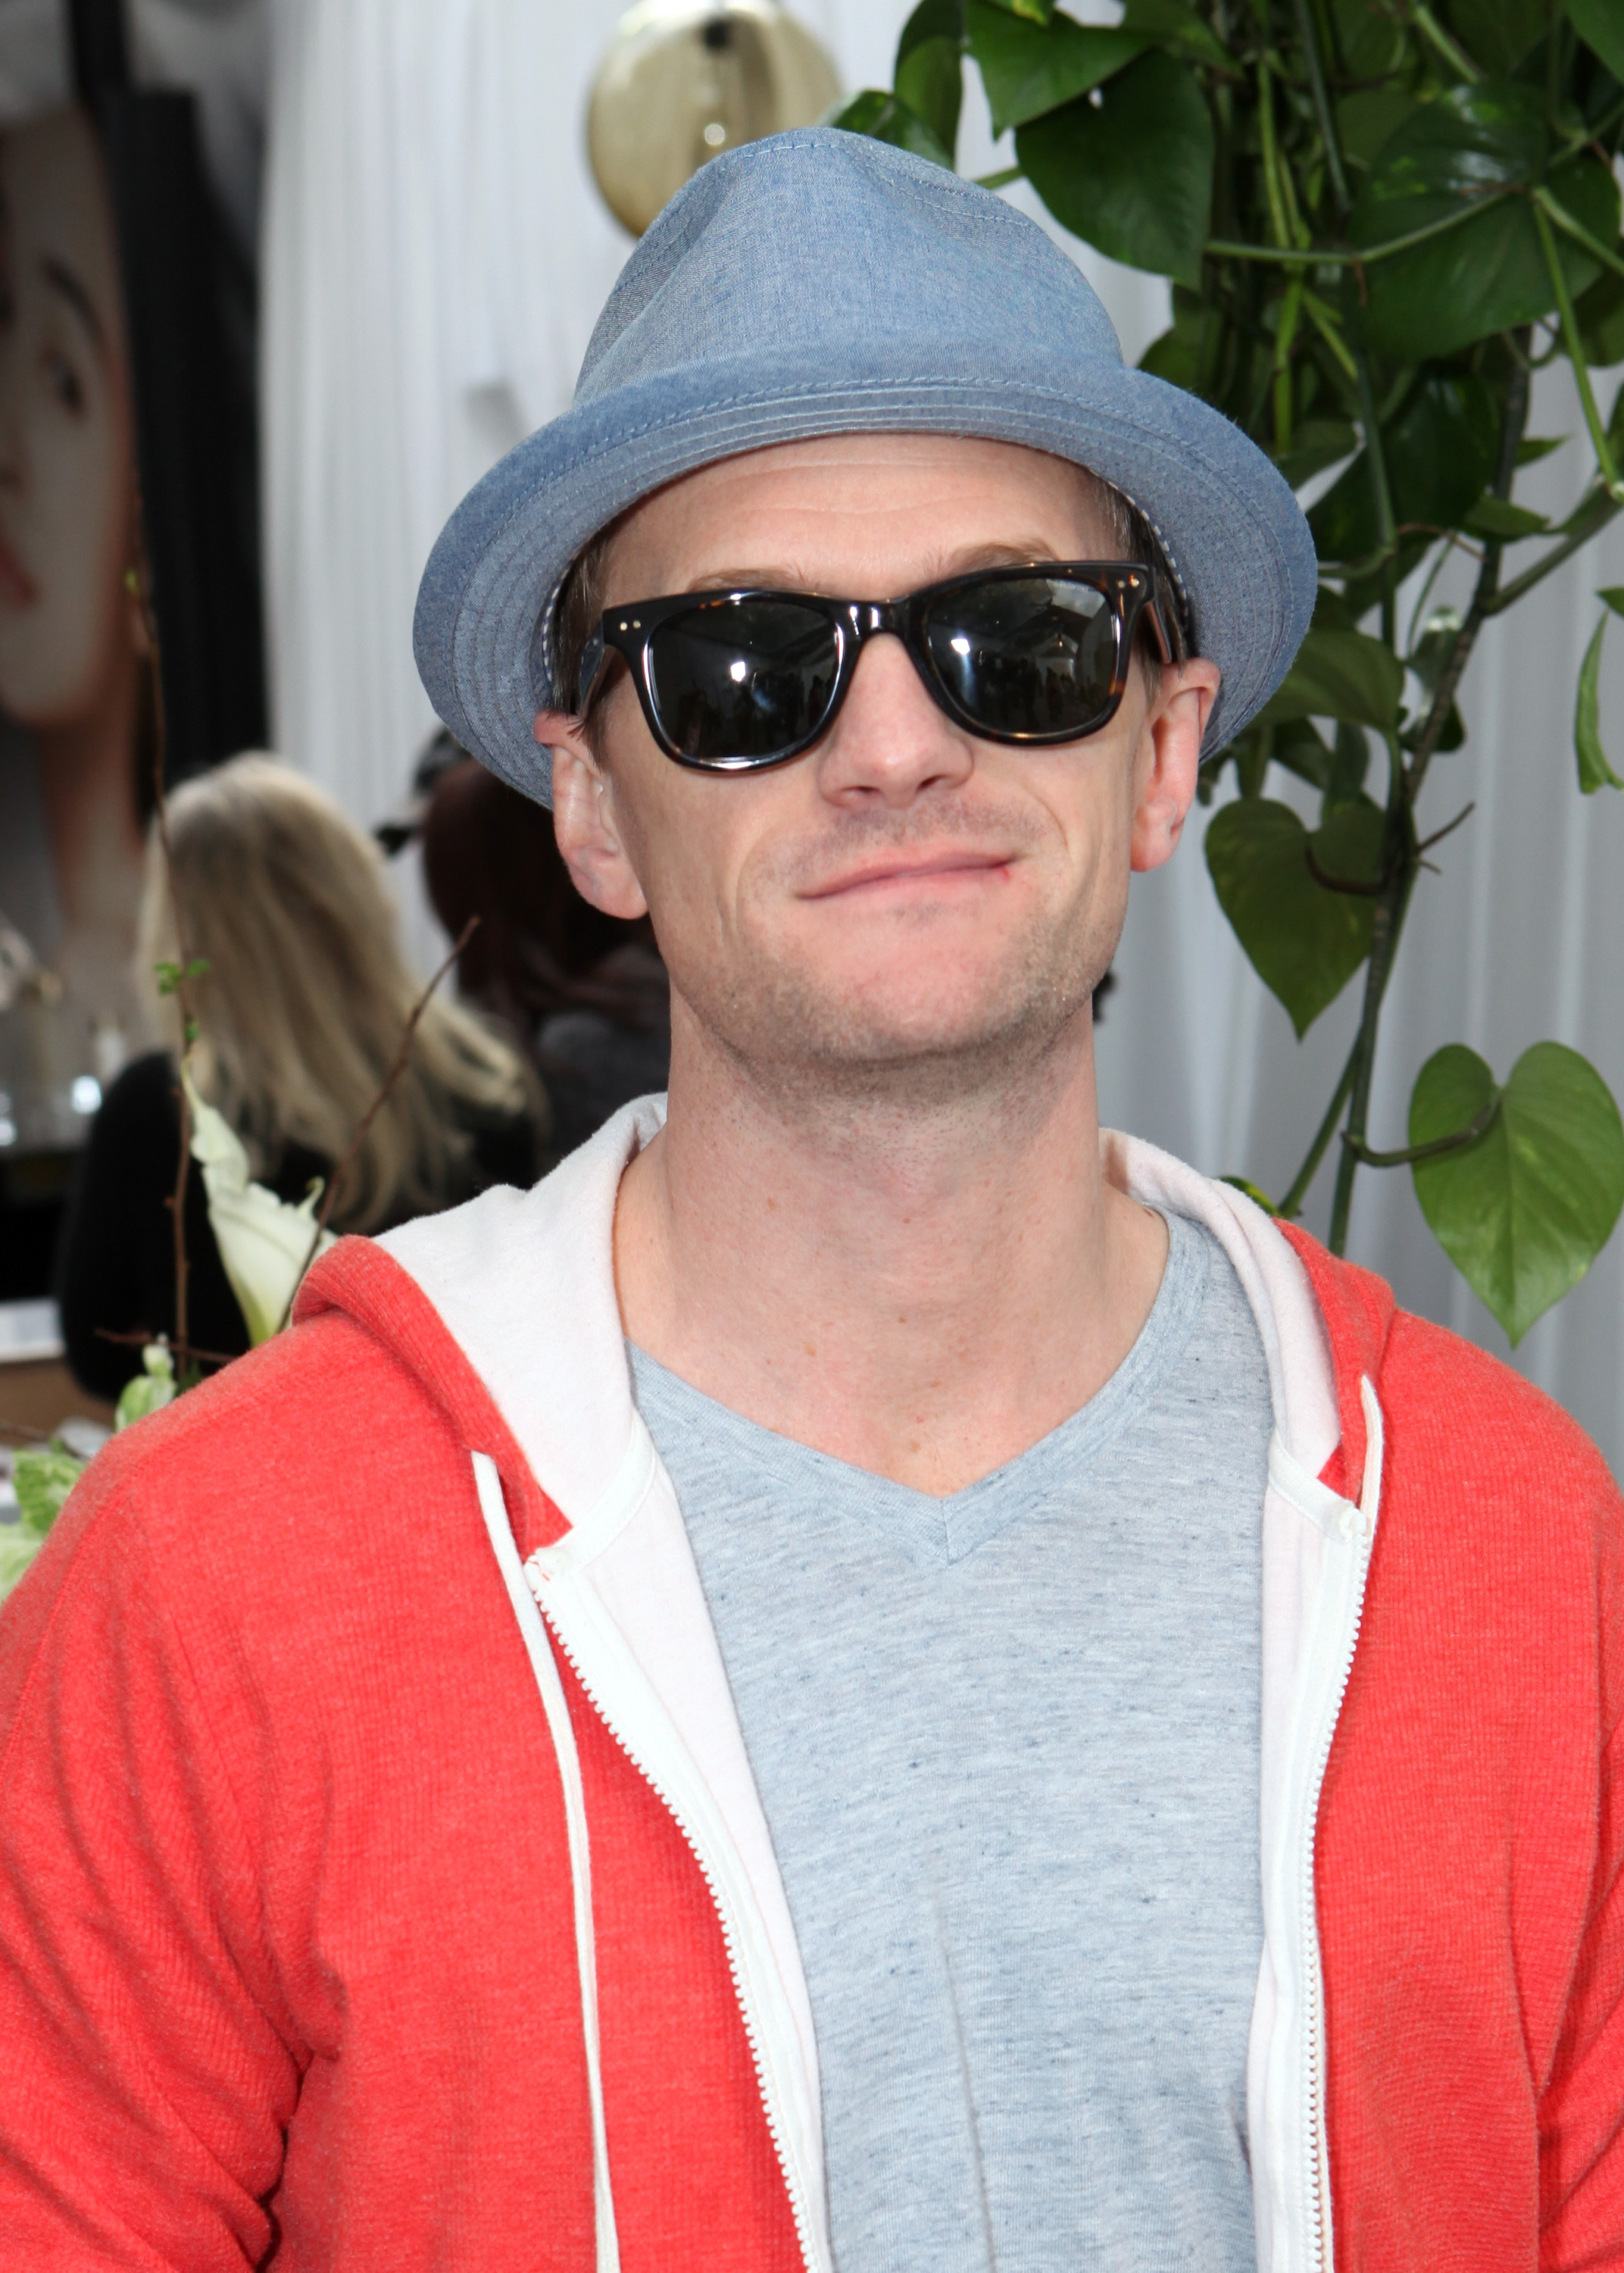 LOS ANGELES, CA - FEBRUARY 08:  Neil Patrick Harris in Polaroid X8311/S sunglasses poses with SOLSTICE Sunglasses and Safilo USA during the 55th Annual GRAMMY Awards on February 8, 2013 in Los Angeles, California.  (Photo by Alison Buck/WireImage)